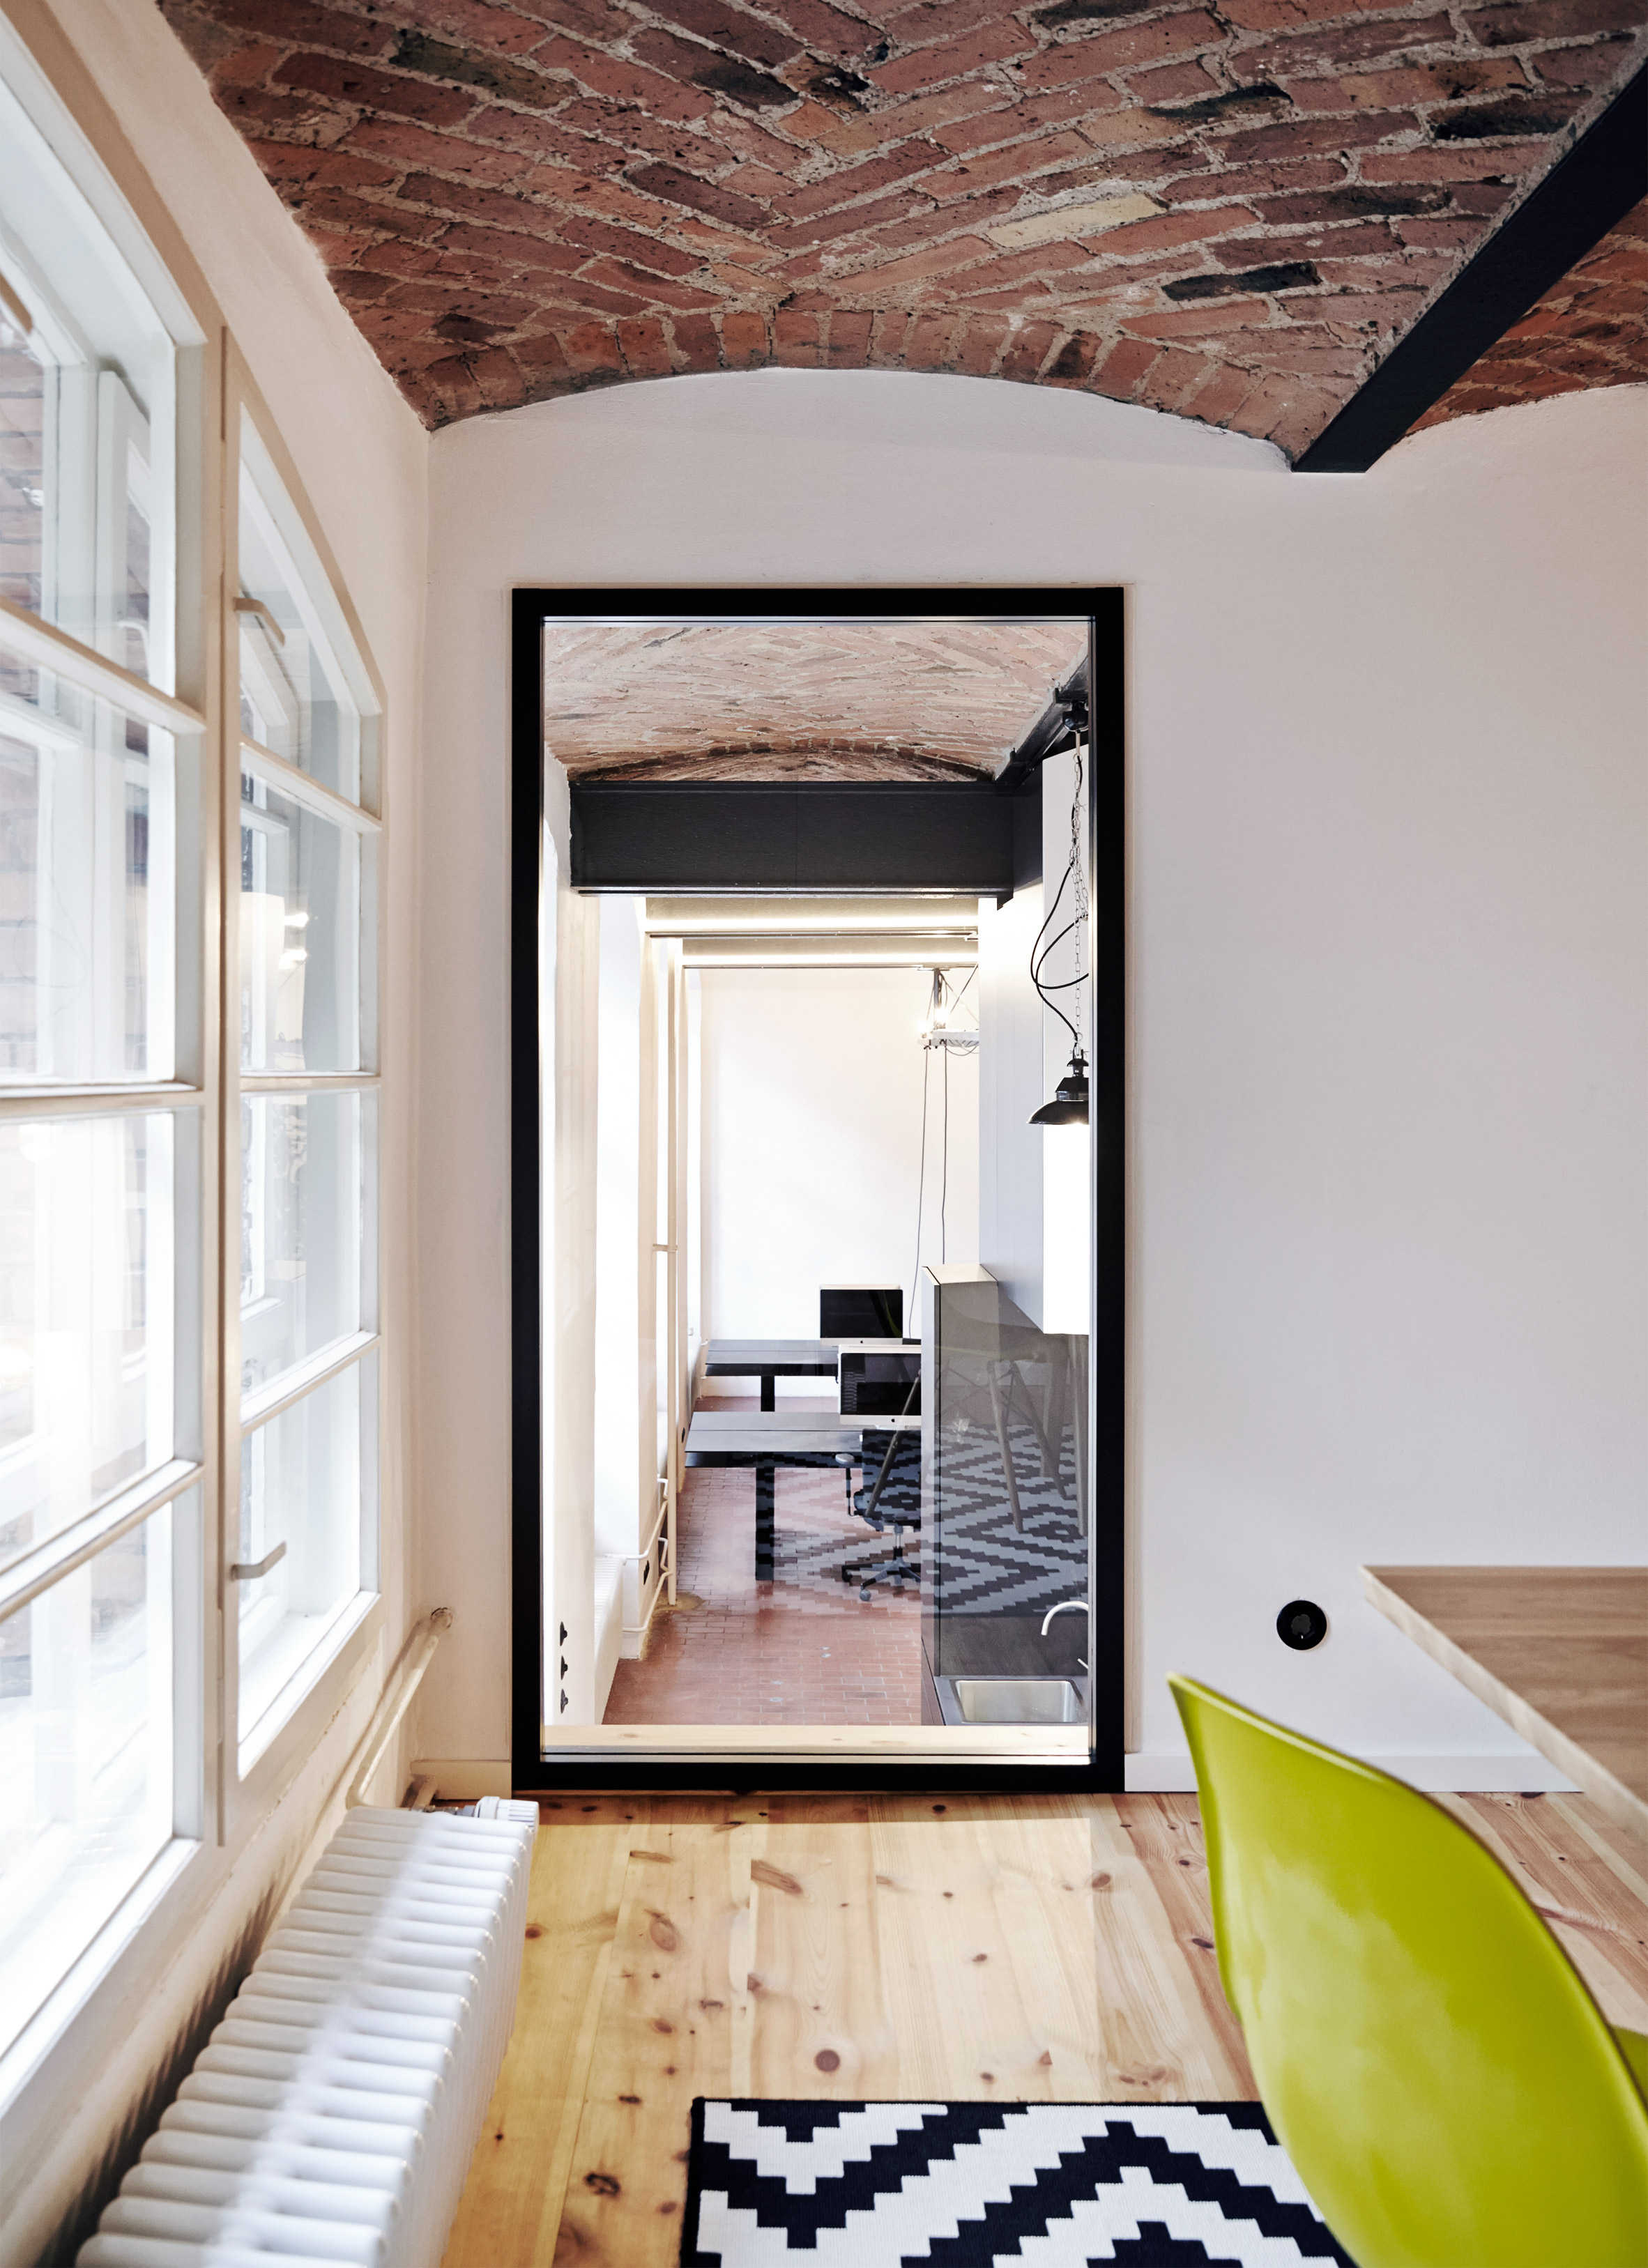 IFUB transforms former chocolate factory into office with secret storage